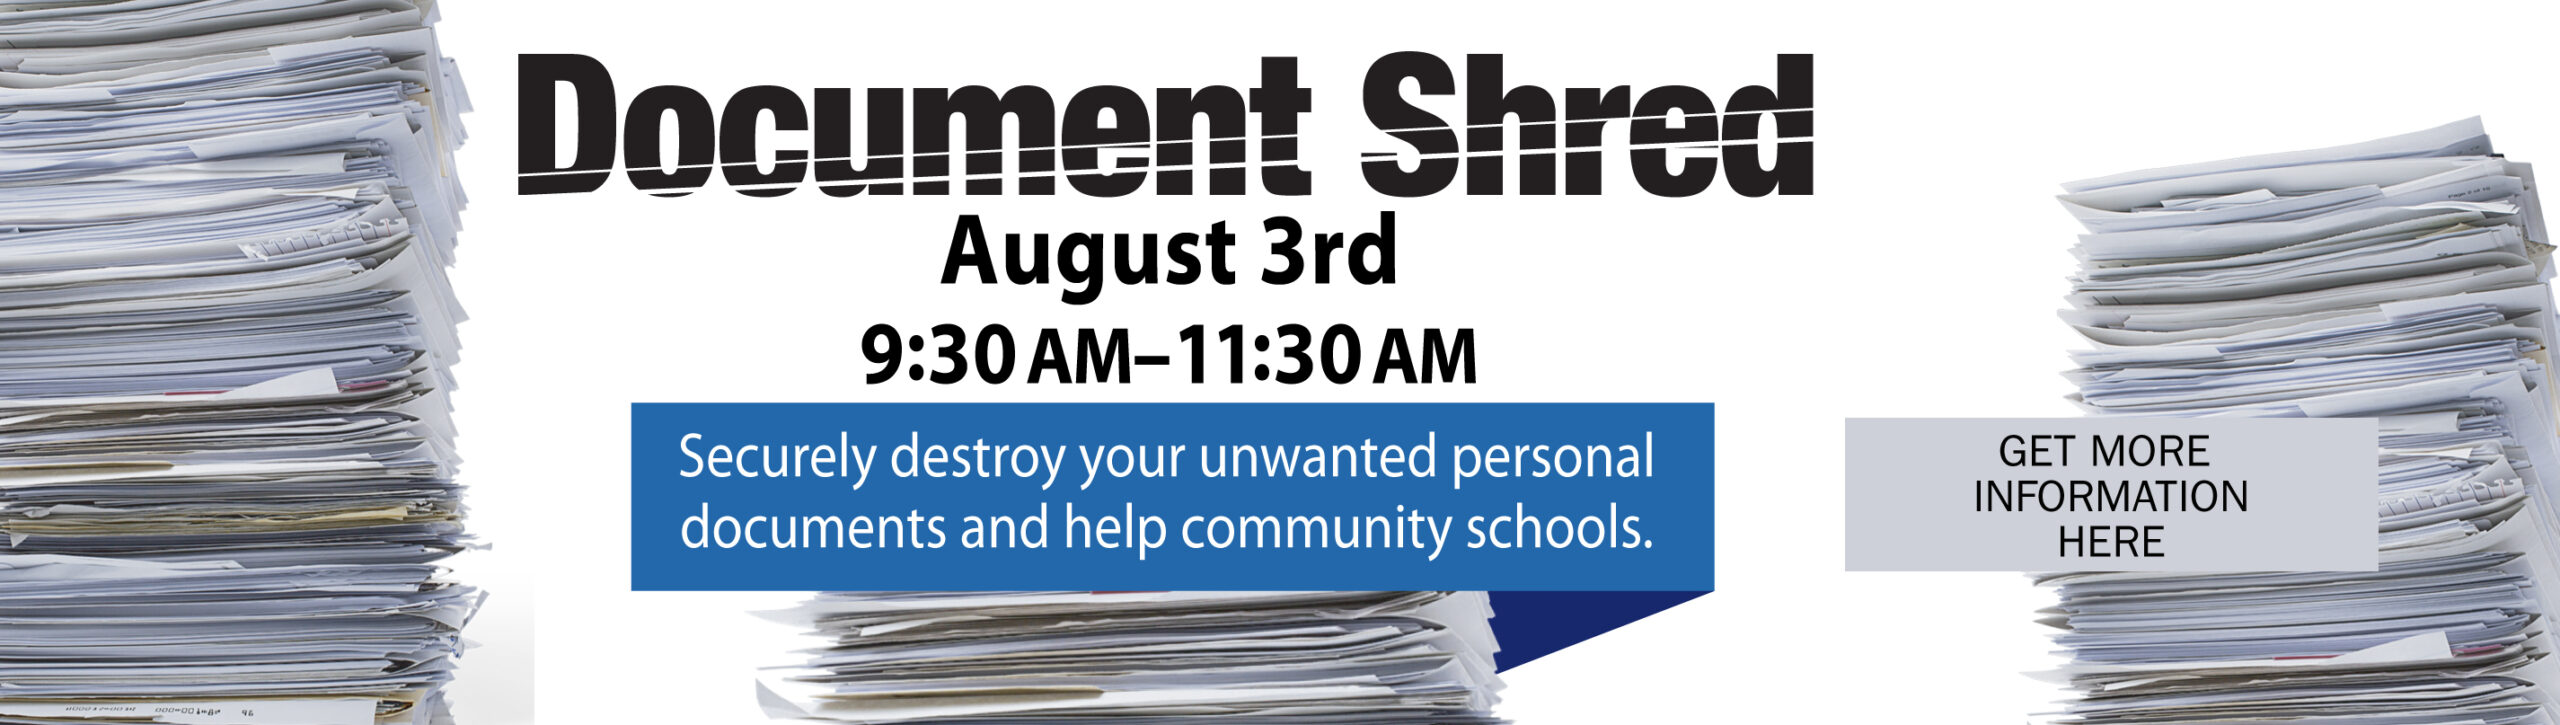 Document Shred August 3rd, 9:30 am– 11:30 am. Securely destroy your unwanted personal documents